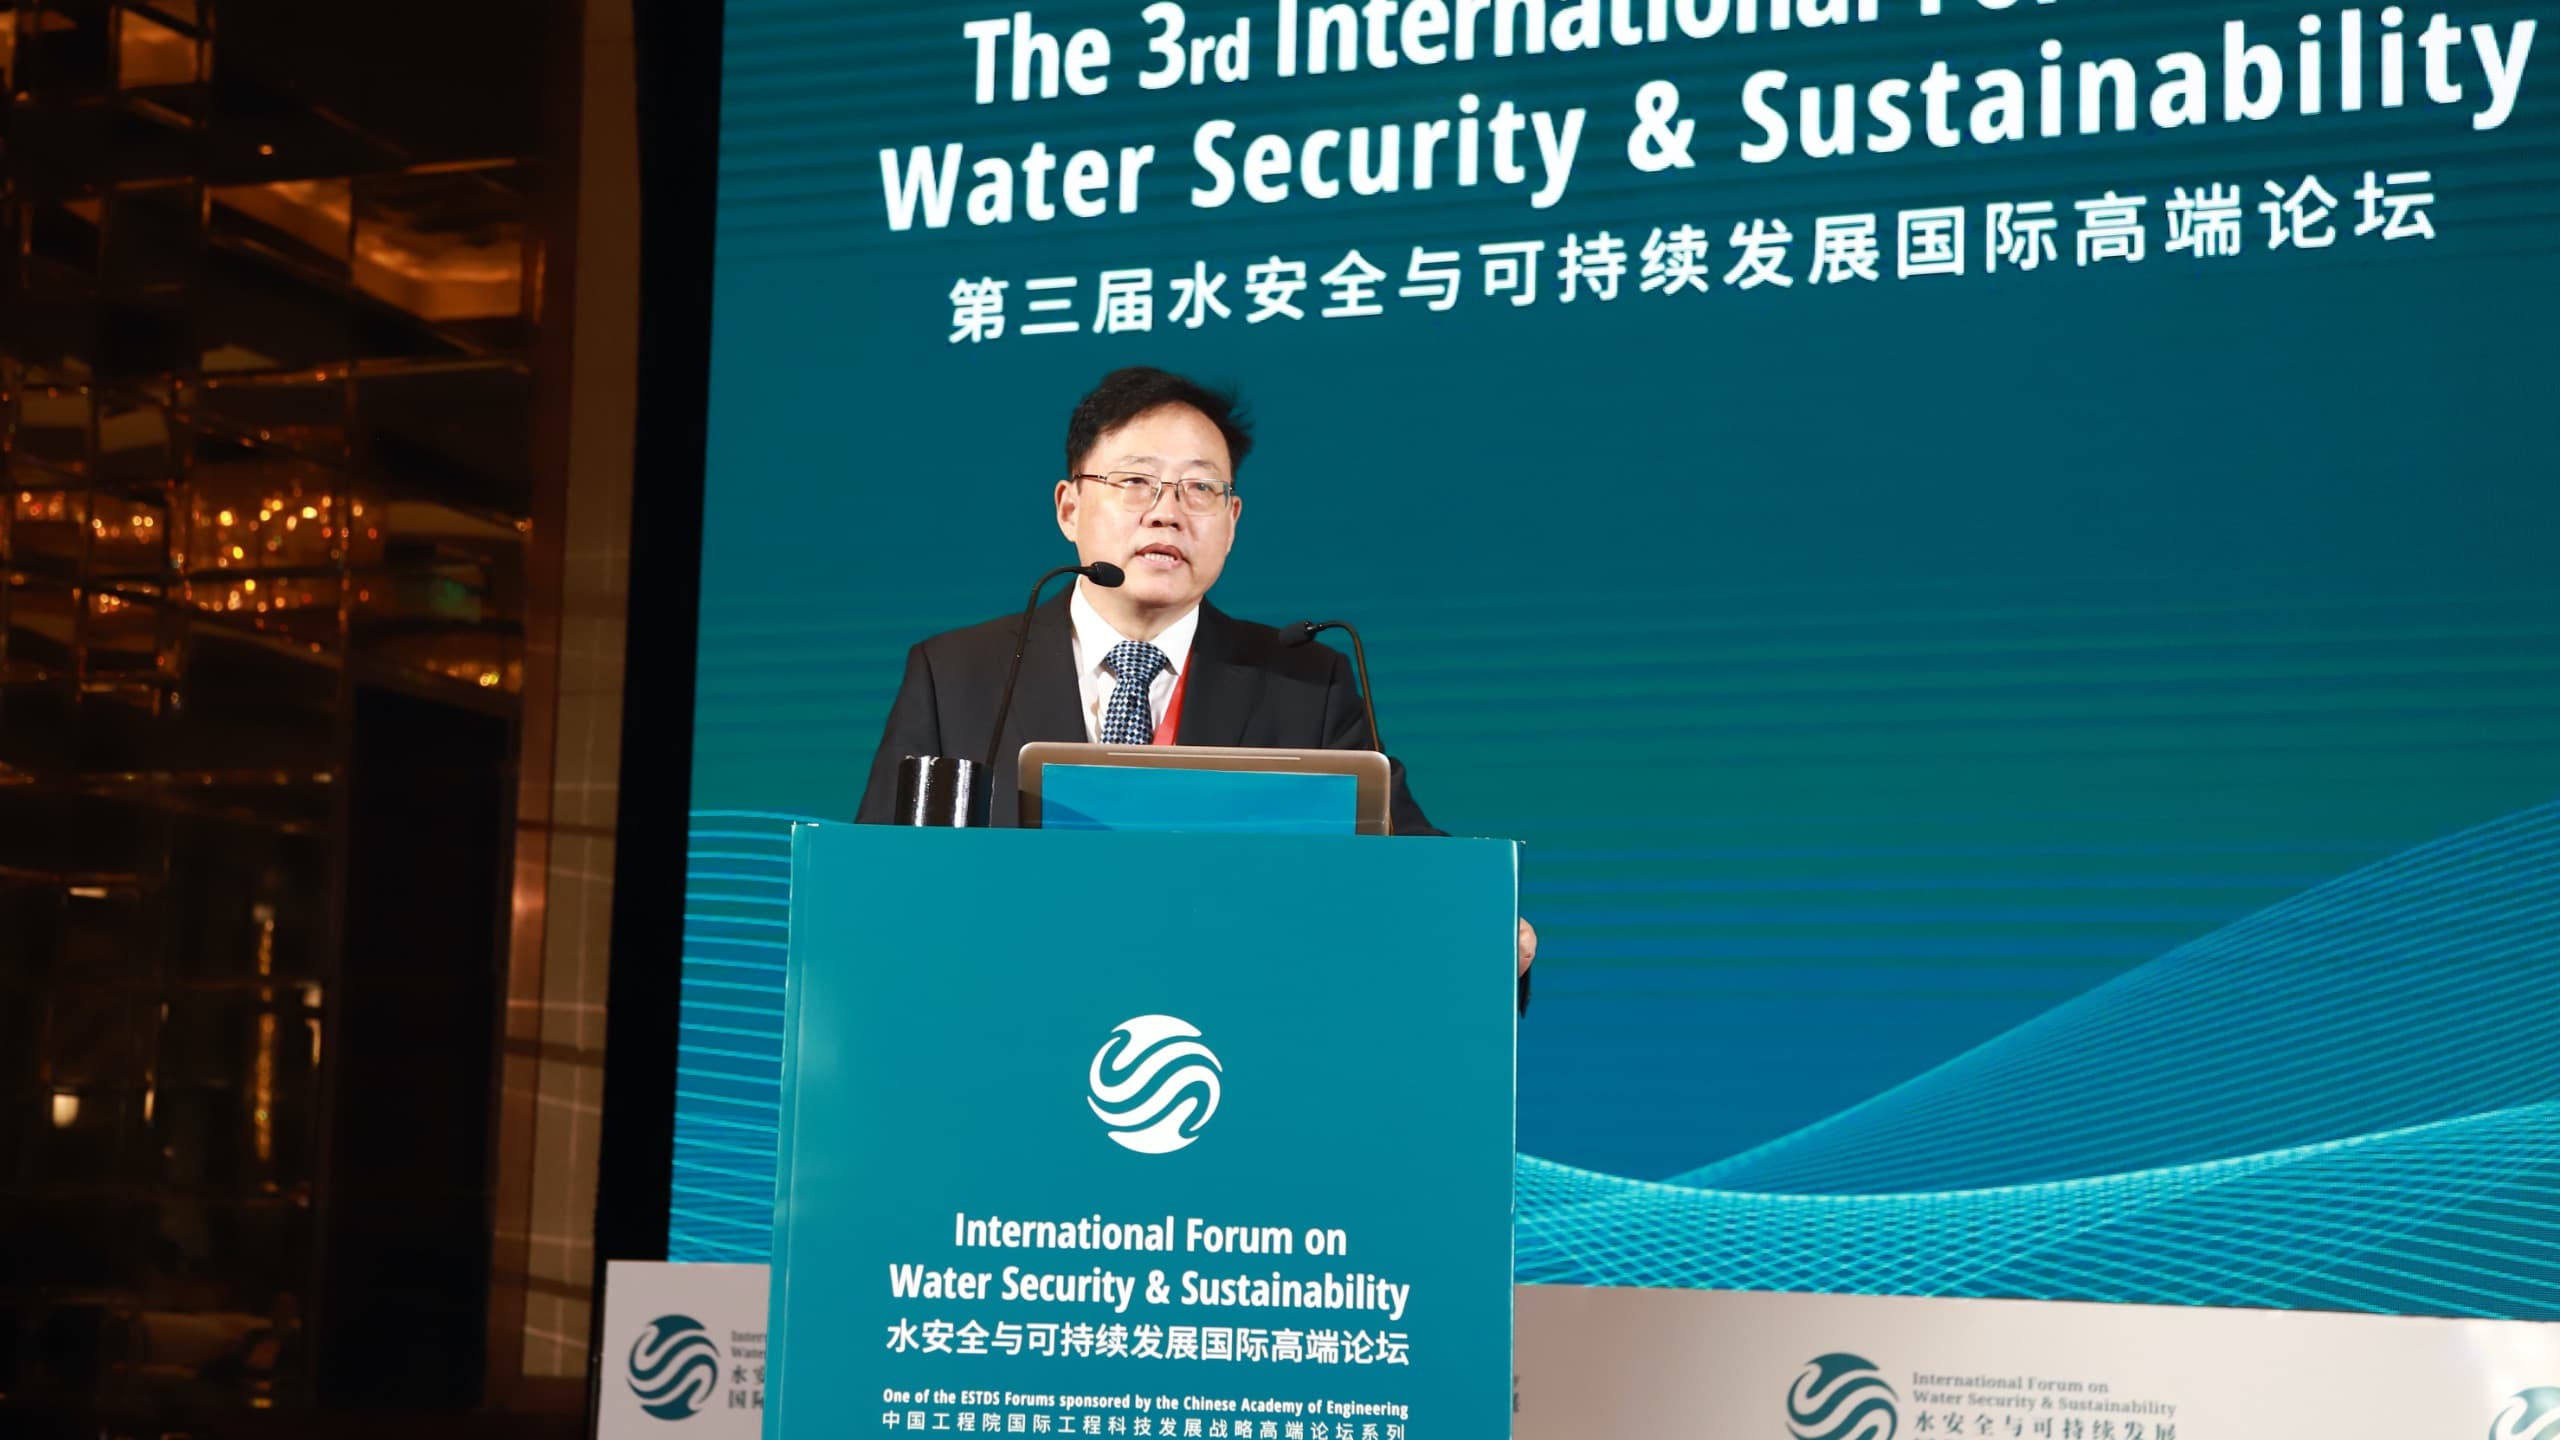 Prof Jianyun Zhang delivering the opening speech at the Third International Forum on Water Security and Sustainability, Nanjing, 22 April 2021